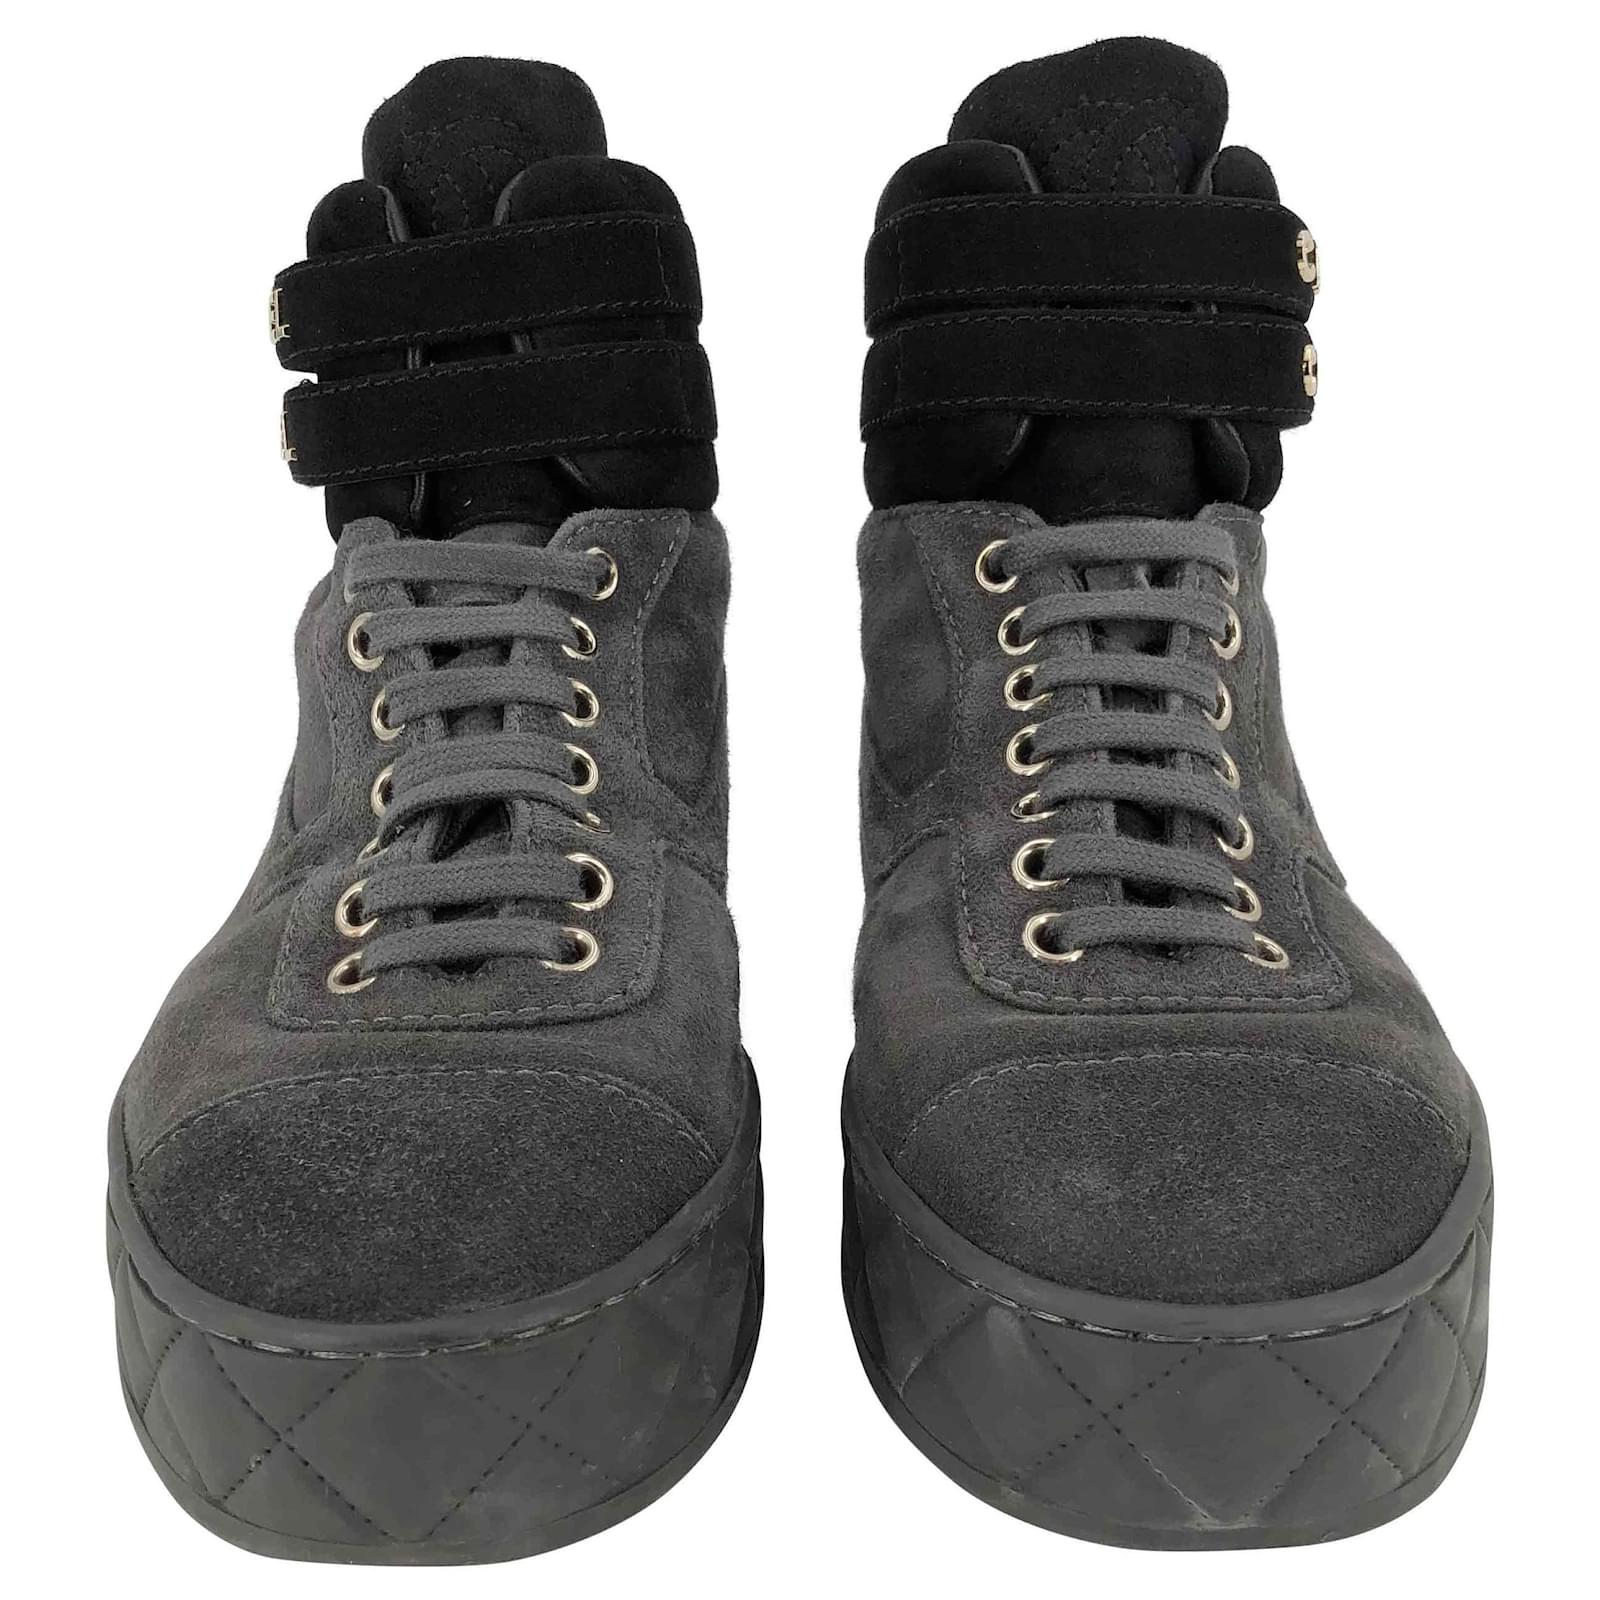 Sneakers Chanel Chanel Ankle Strap High Top Baskets in Grey Suede with Silver Chanel Letters